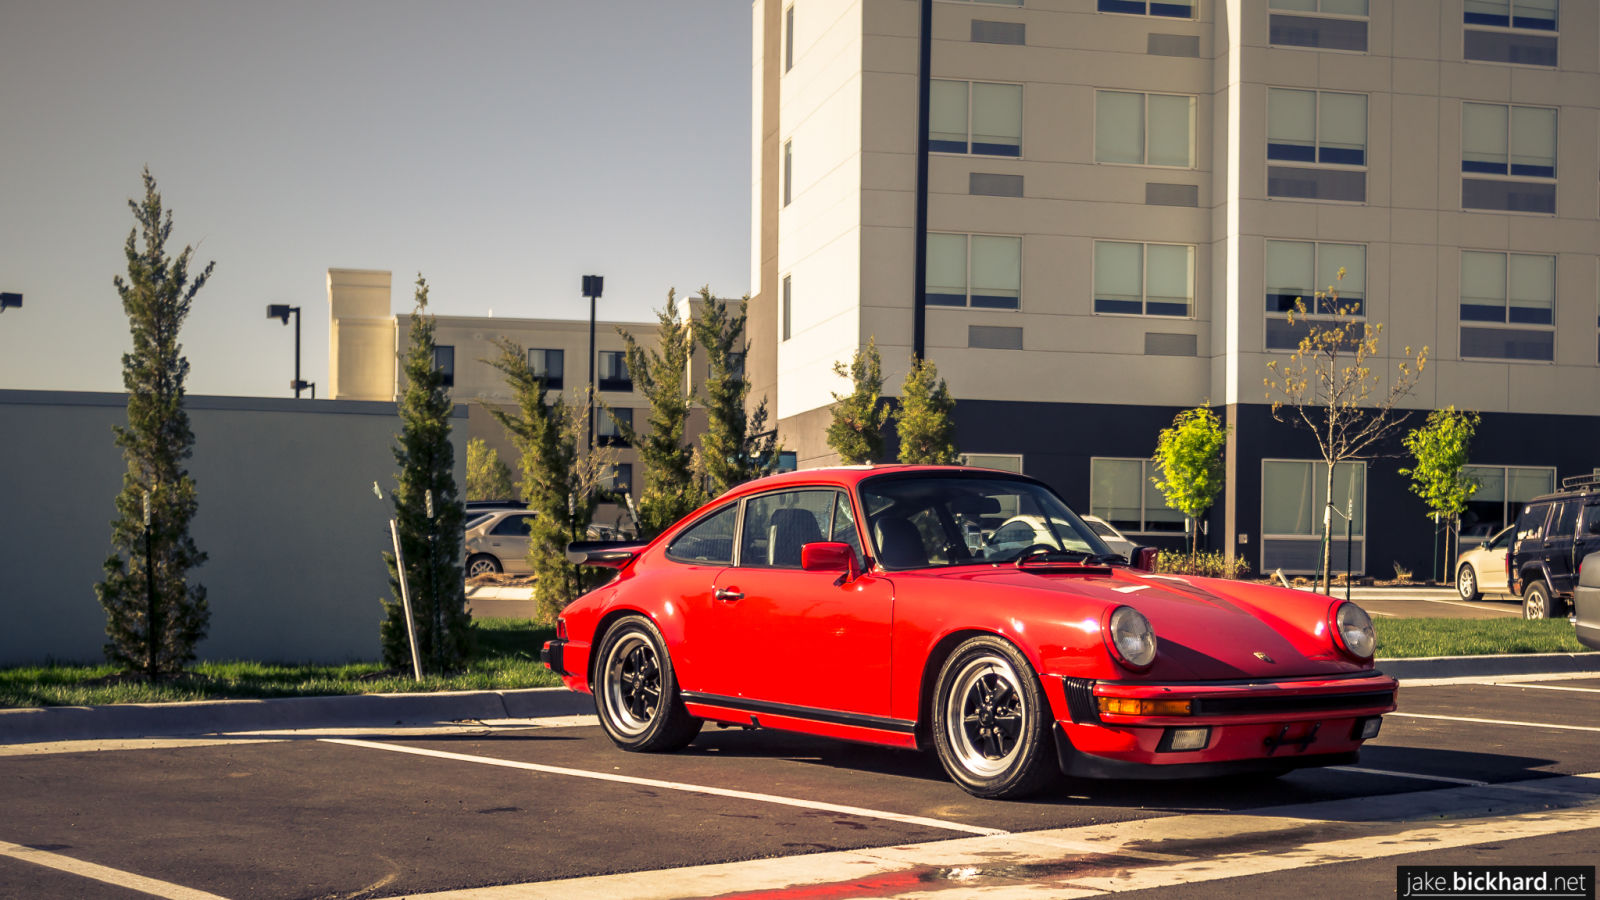 Tyler Hoover owned this 911 for a minute. The paint is in absolutely excellent condition.